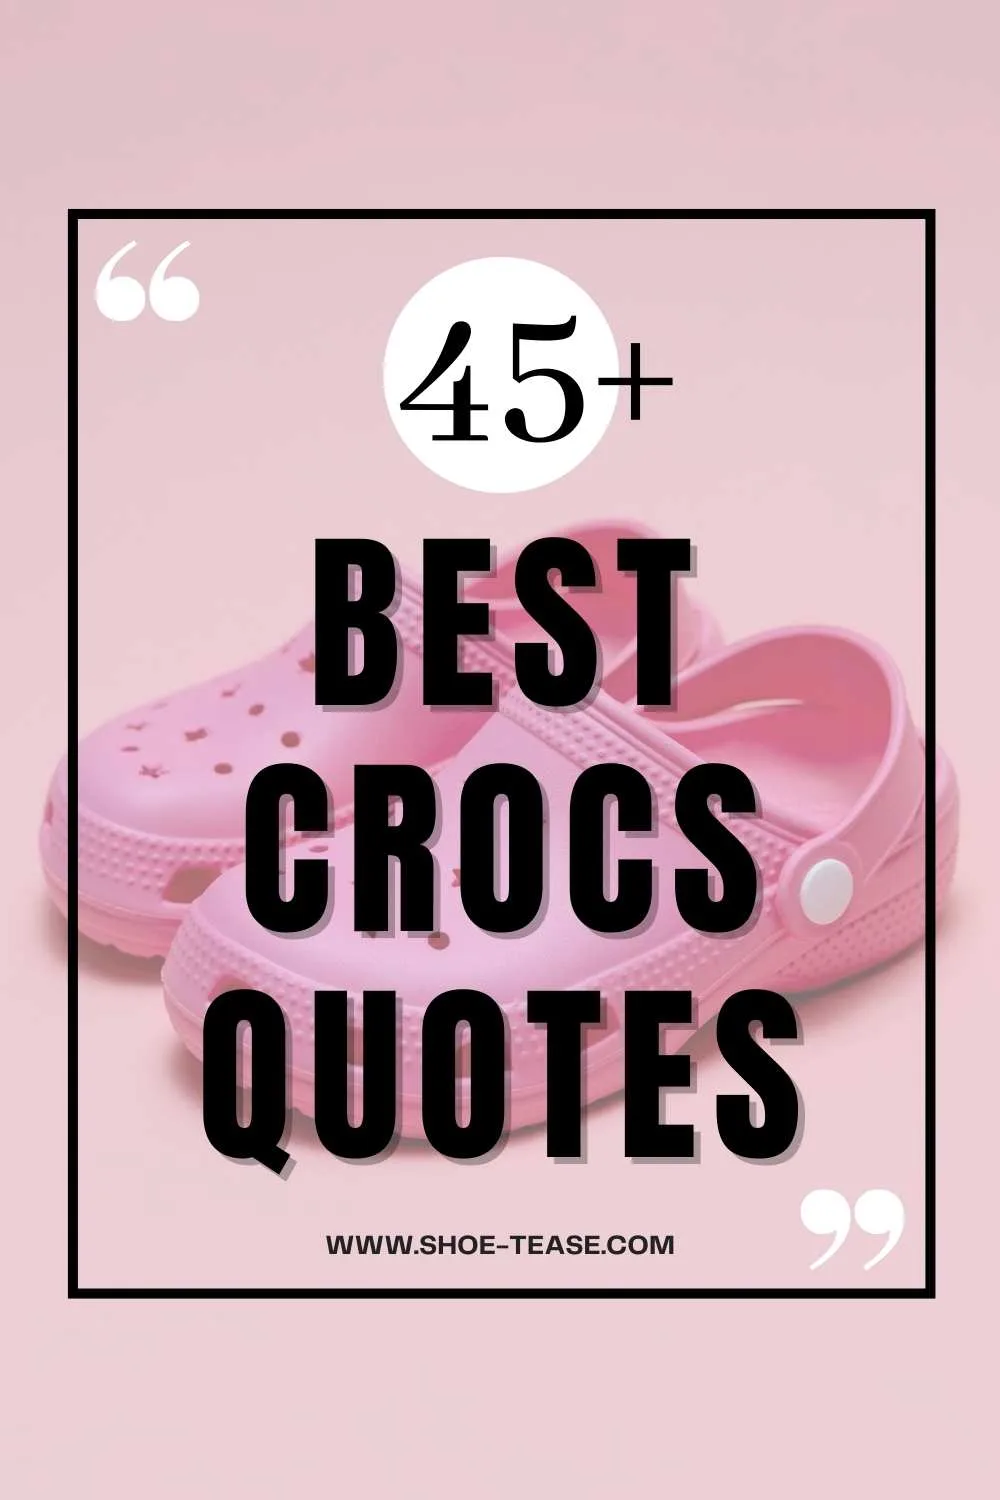 Collage of text reading 45 best crocs quotes over image of pink crocs shoes.